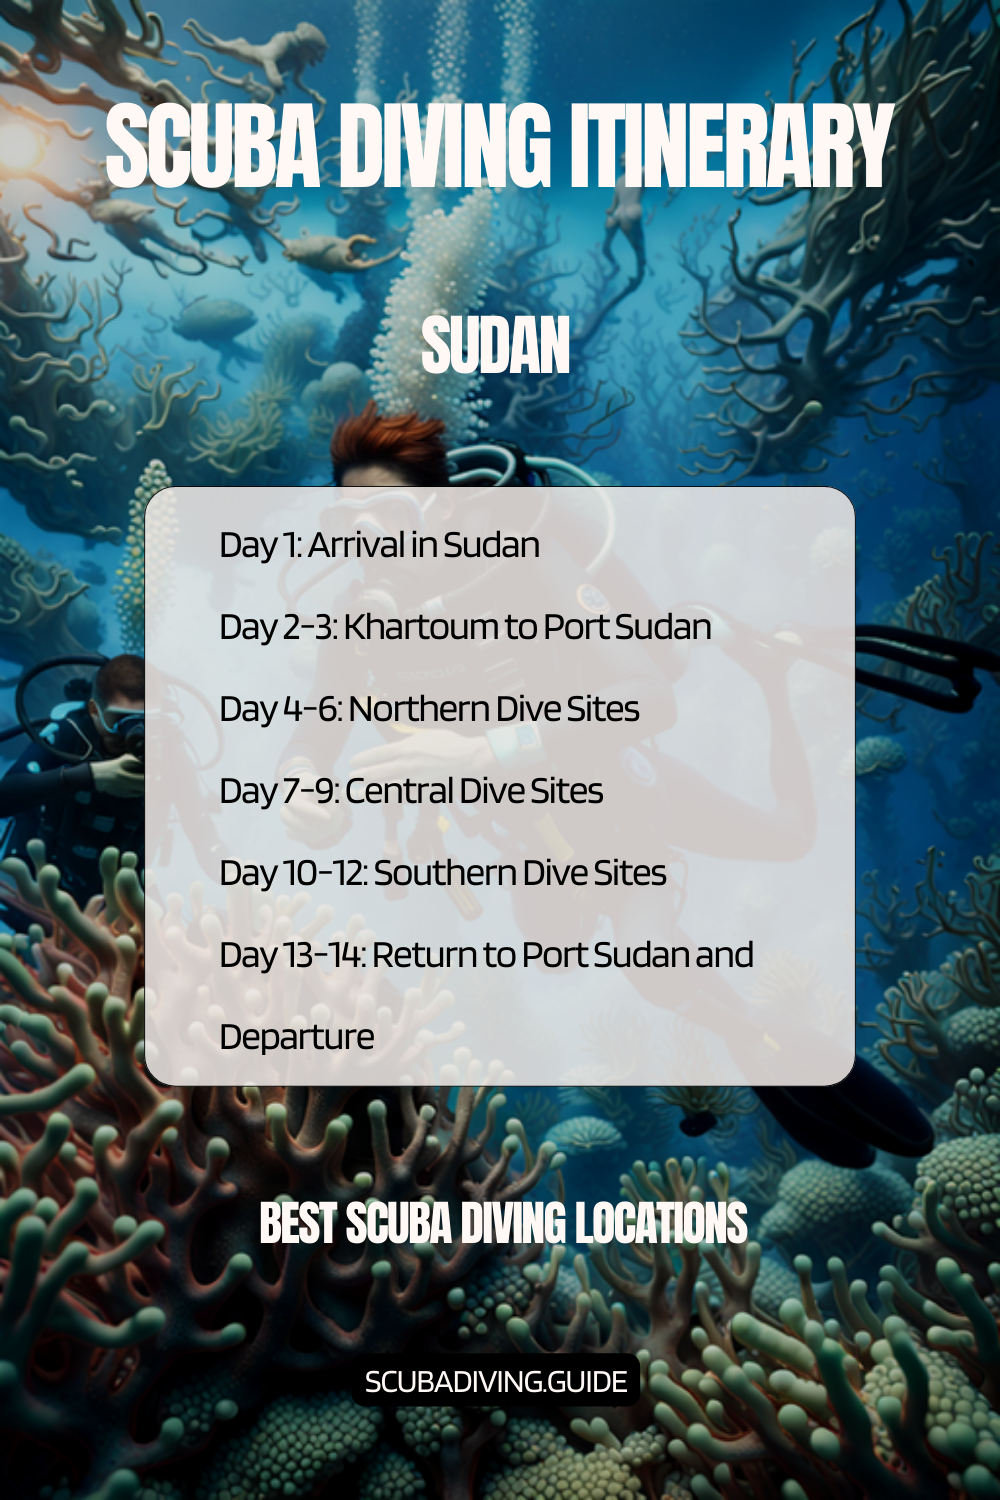 Sudan Recommended Scuba Diving Itinerary